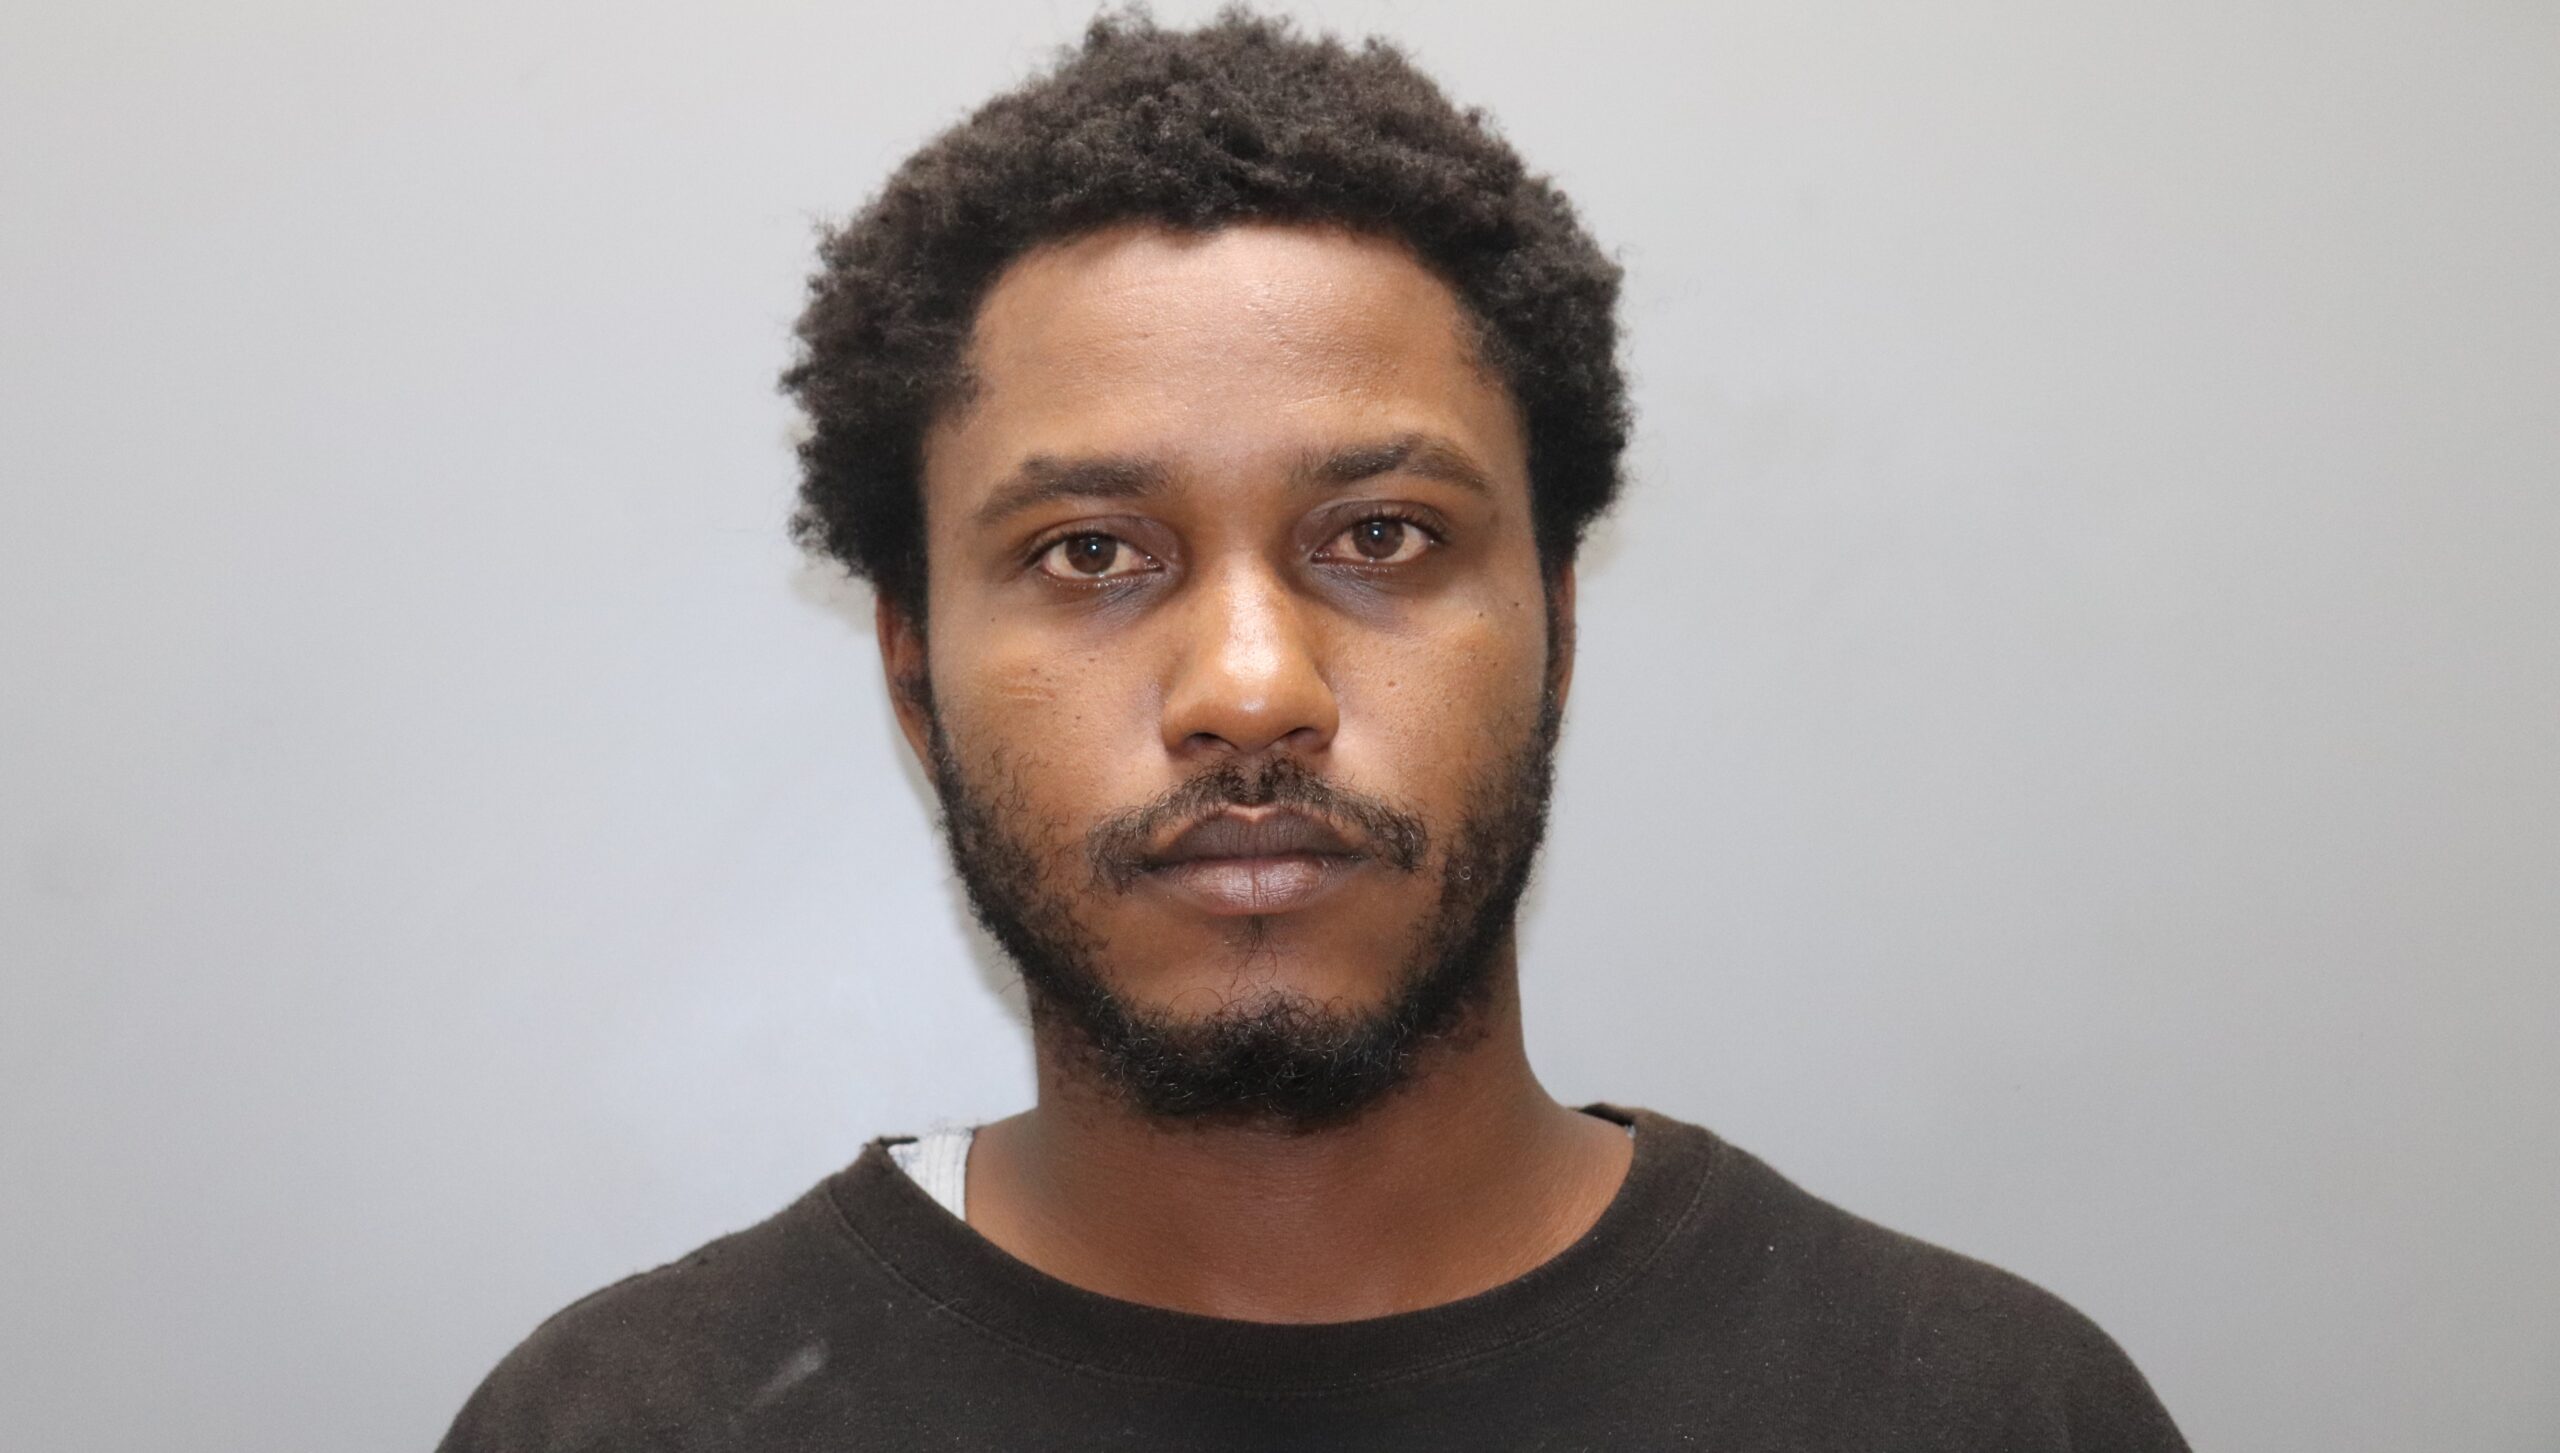 St. Thomas Man Wanted In April Fool's Day Assault Turns Himself In To Police: VIPD